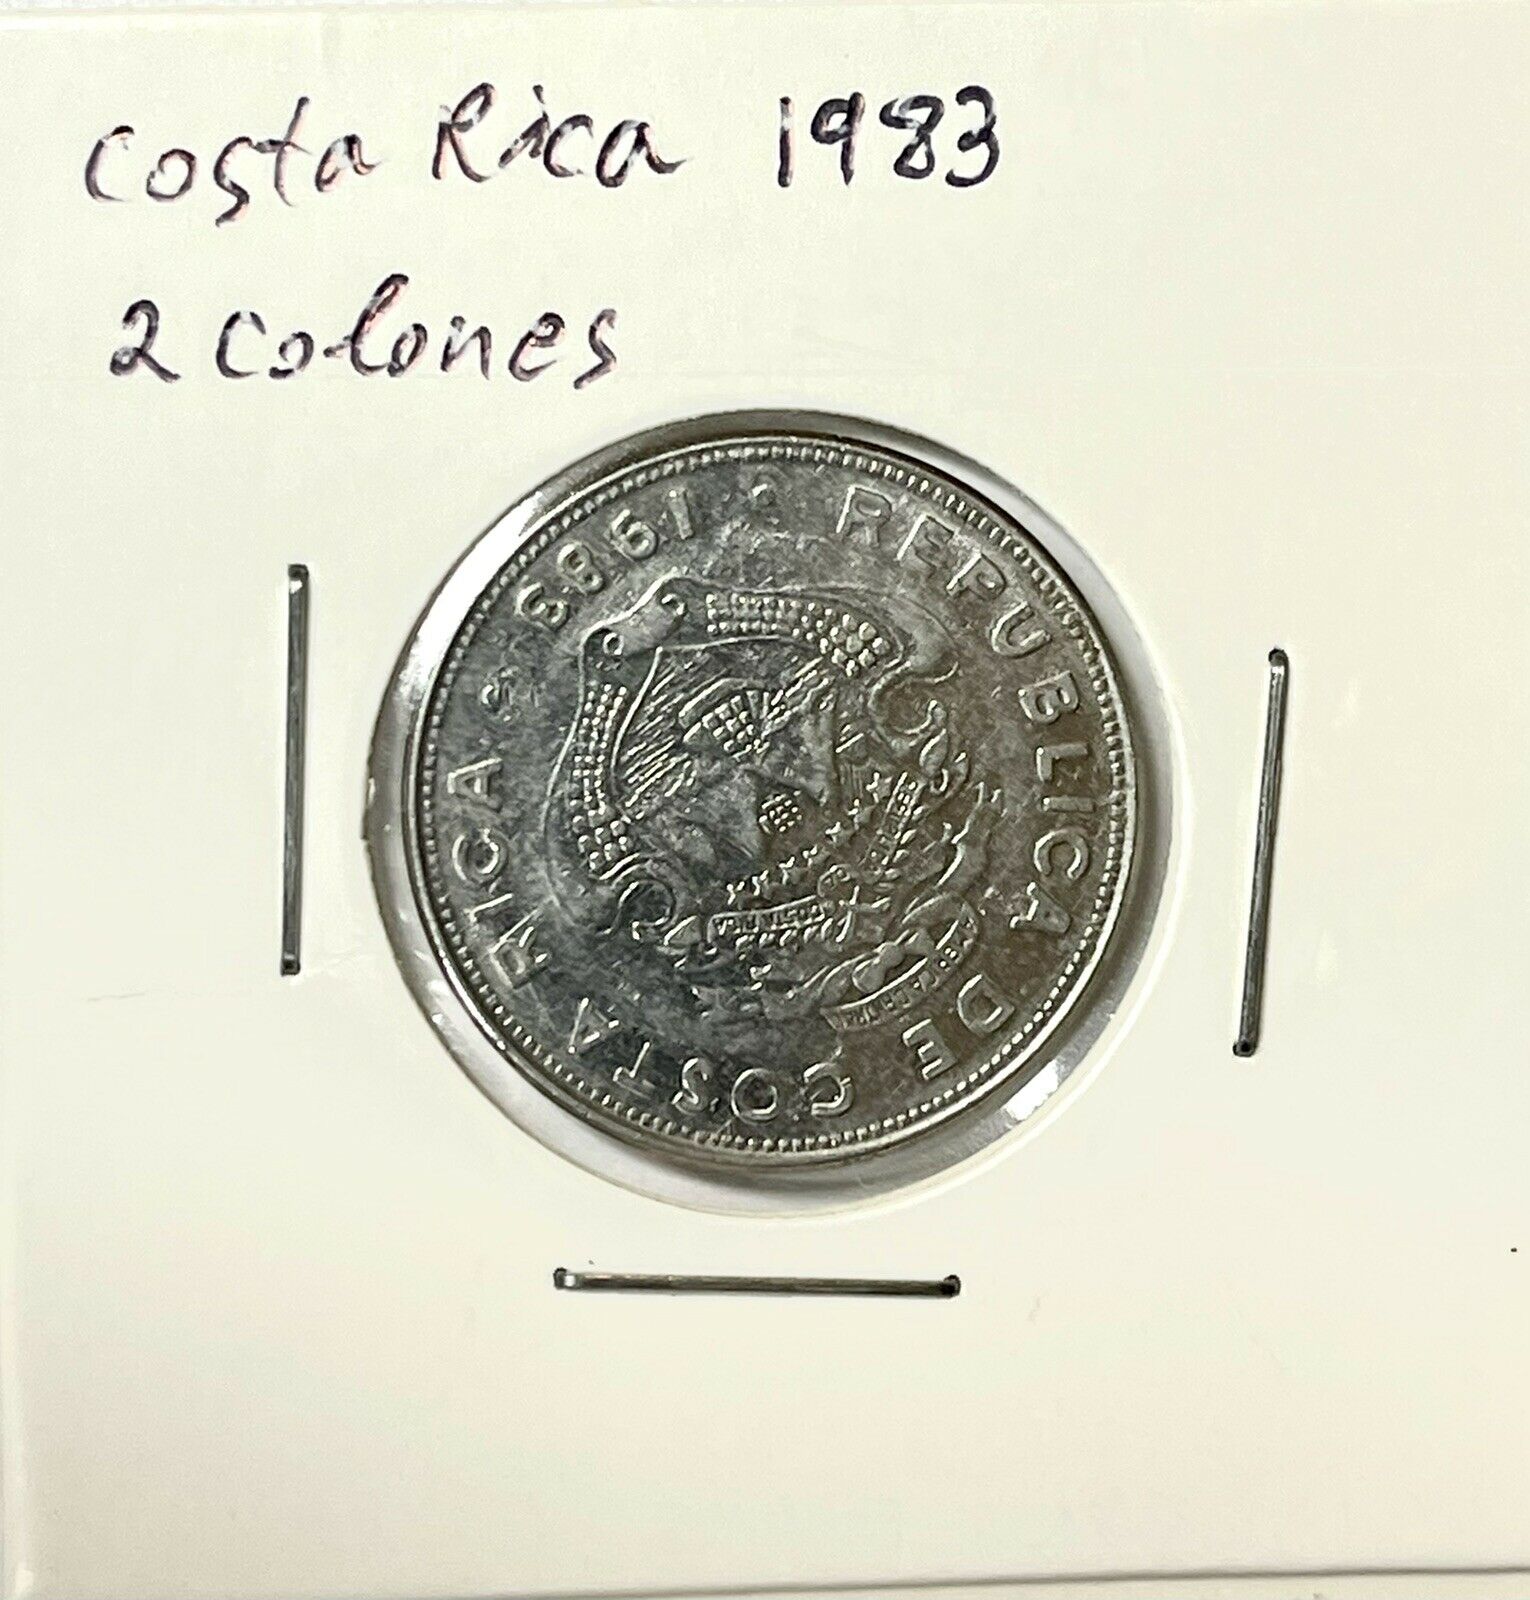 Costa Rica 1983 2 Colones Stainless Steel Coin (33)